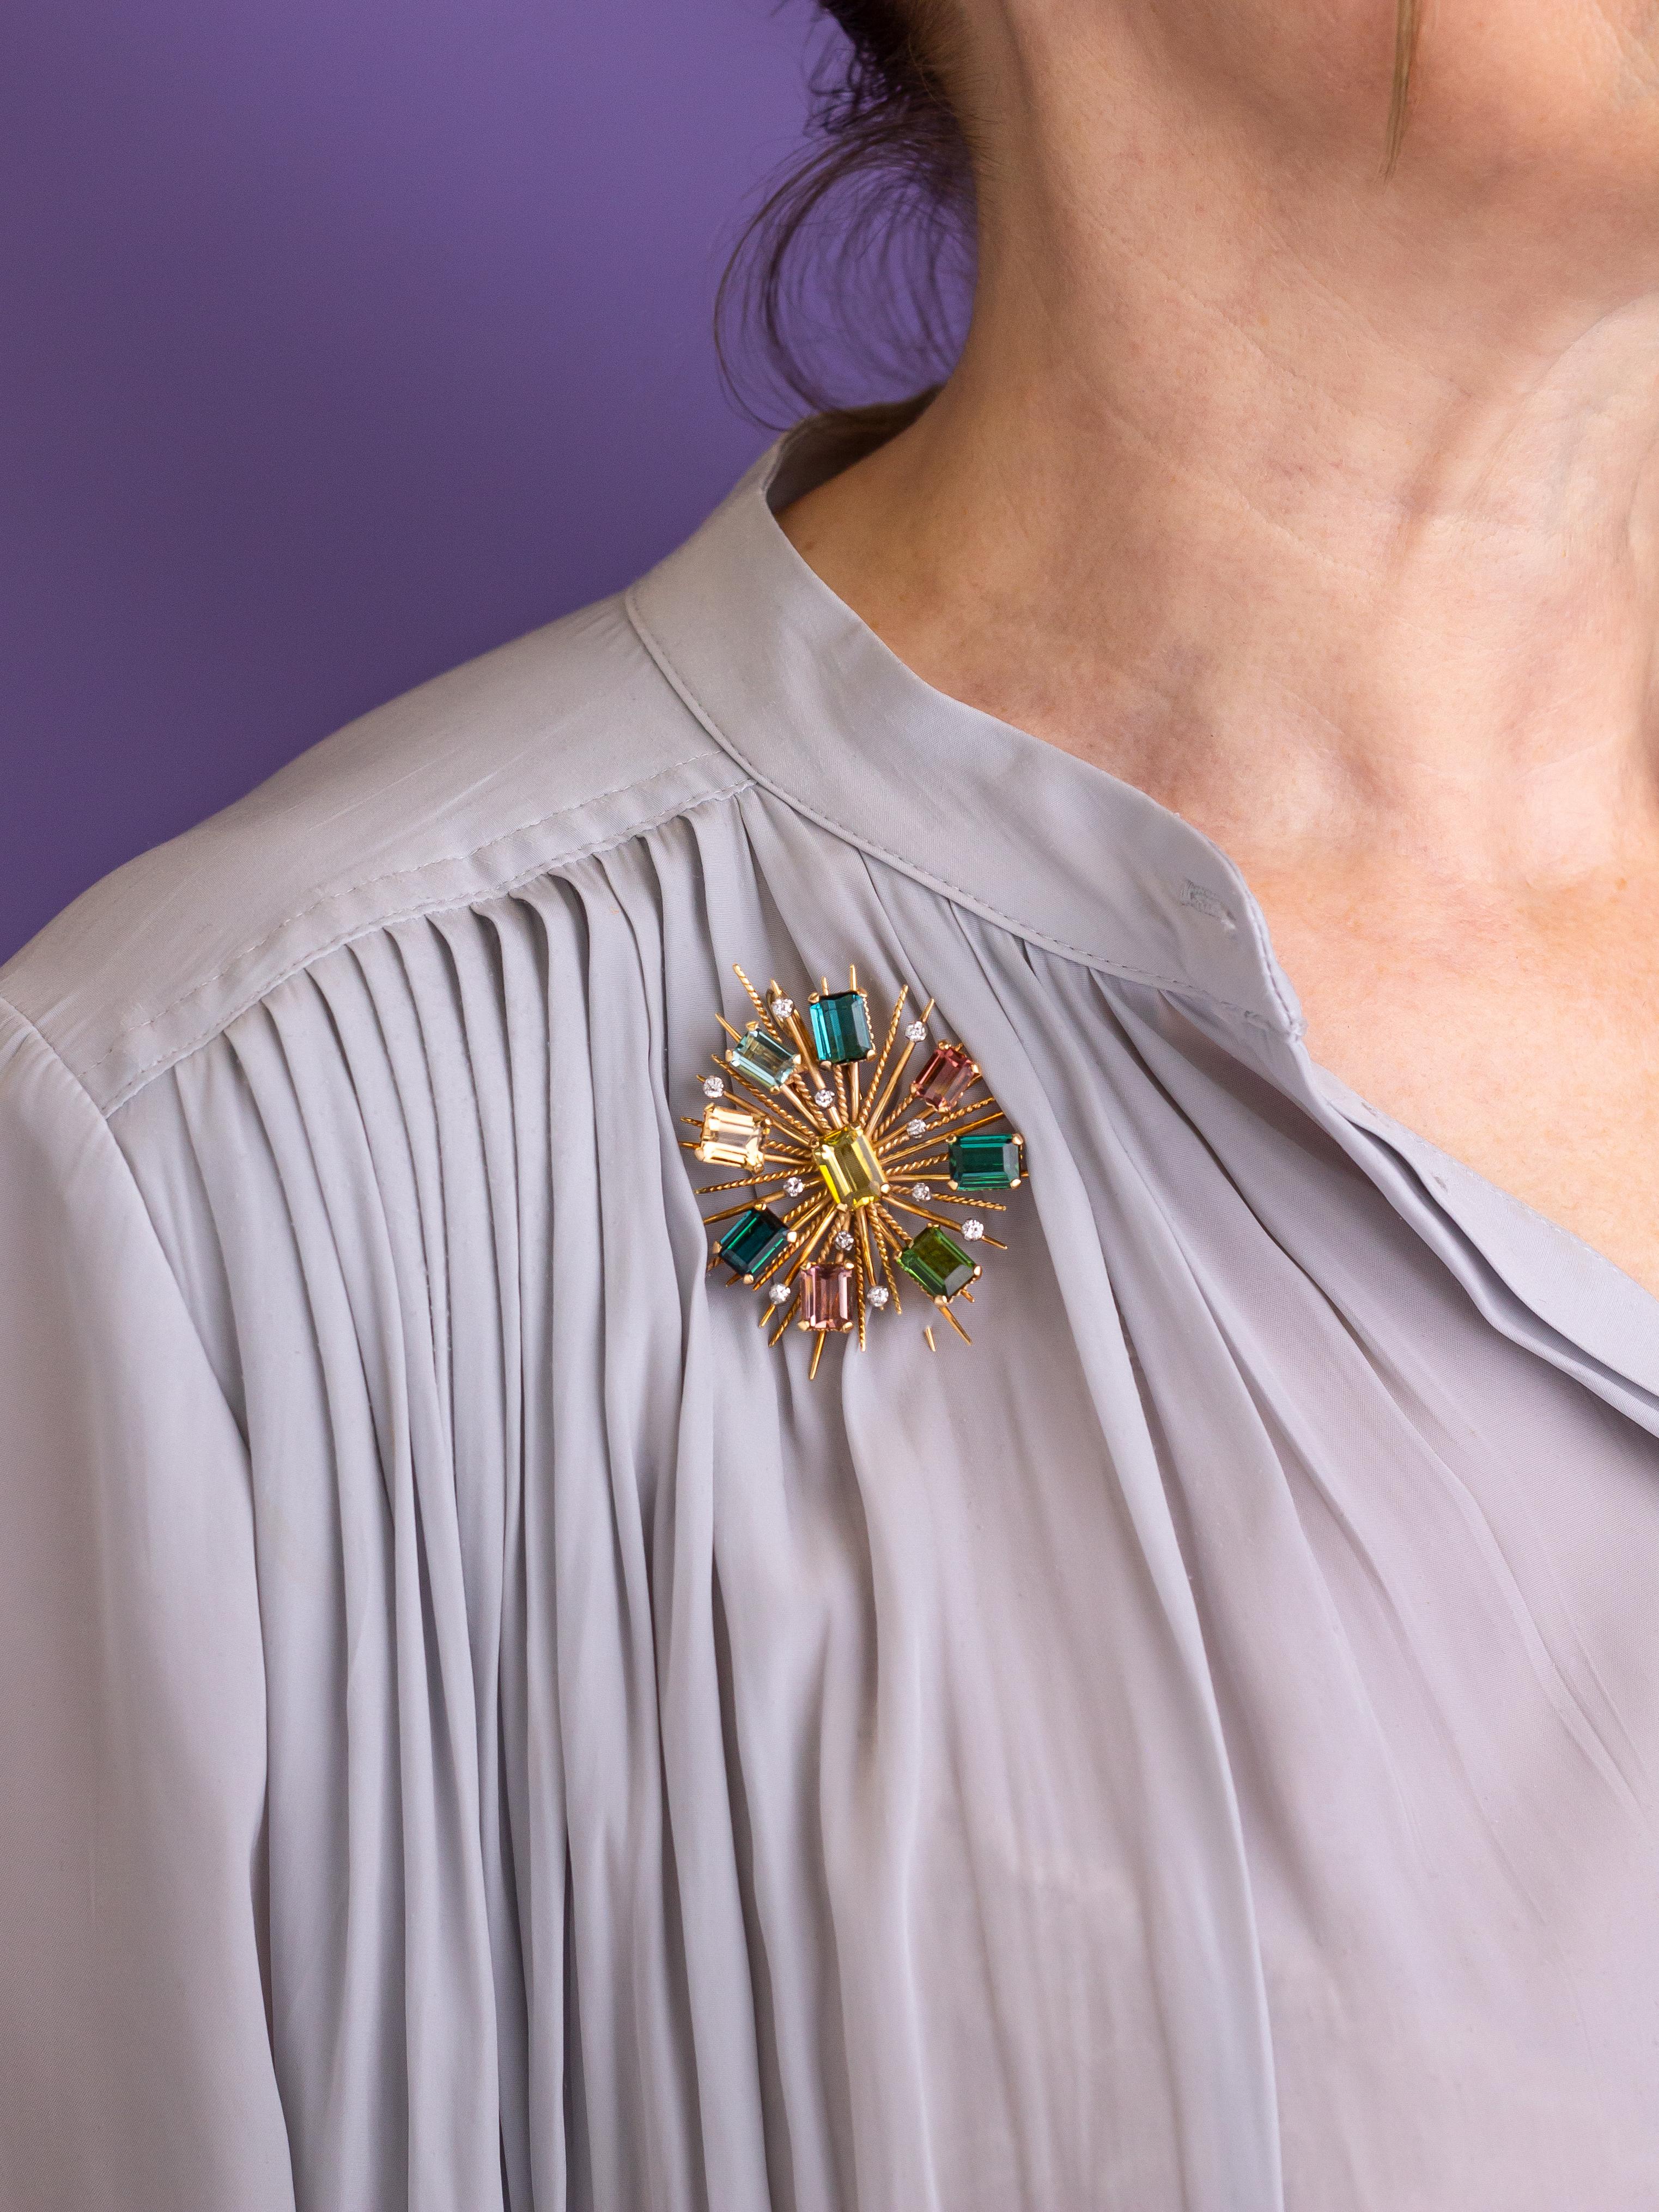 This exceptional mid century brooch pendant has been crafted from 18 karat rose and white gold and set with tourmalines and diamonds. The piece features nine emerald cut tourmalines that are classed as, bright mid yellow, bright dark greenish blue,